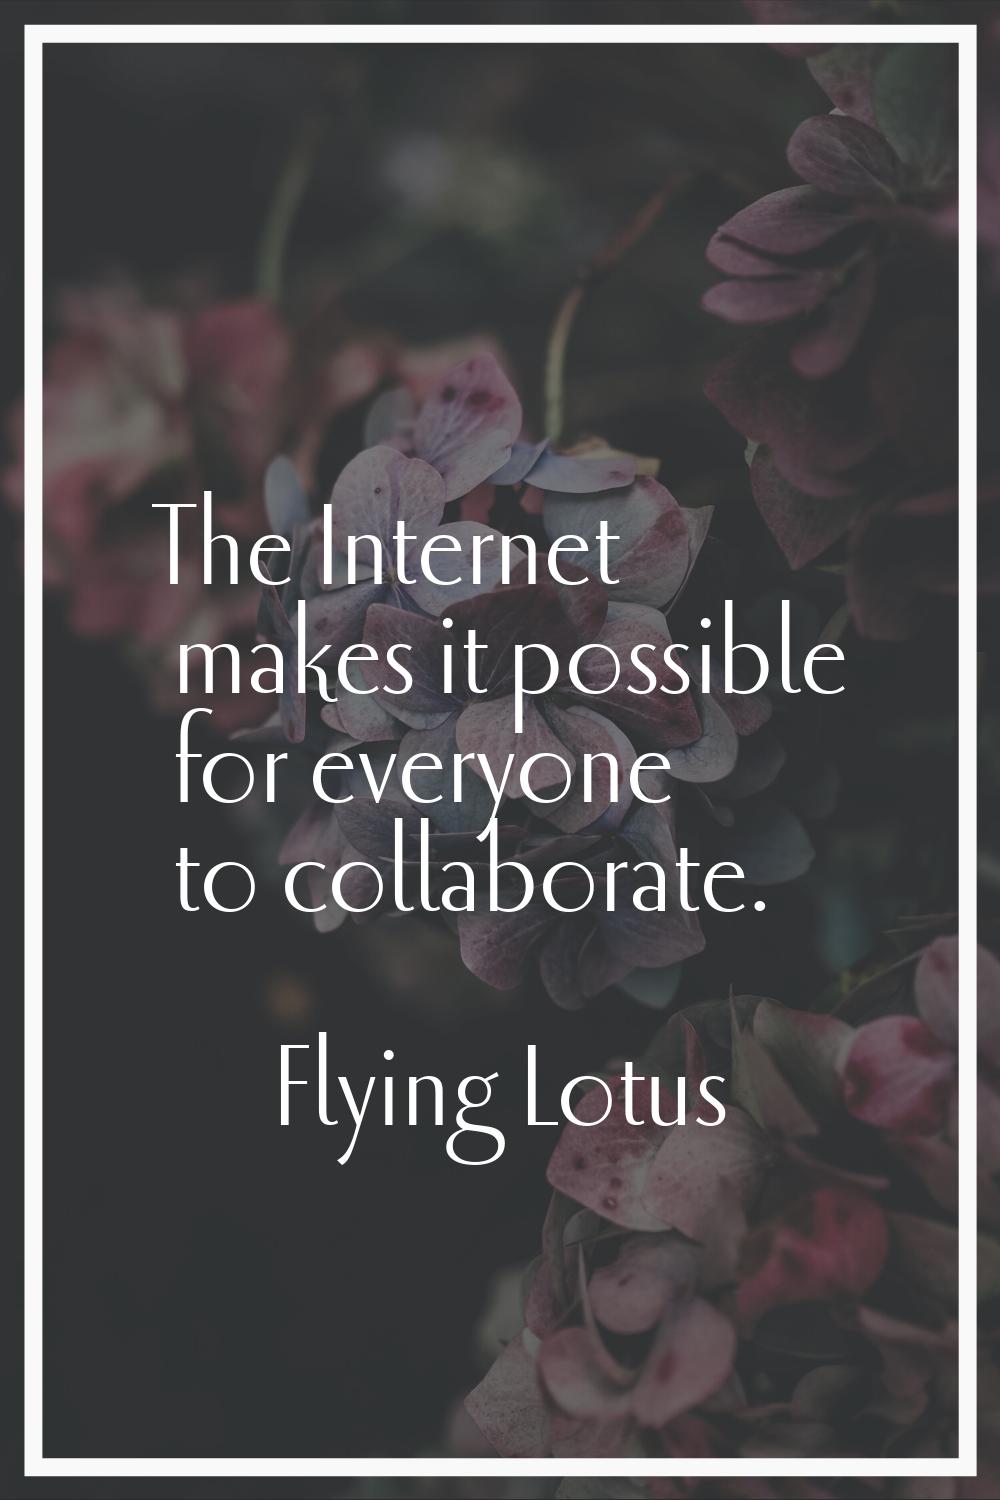 The Internet makes it possible for everyone to collaborate.